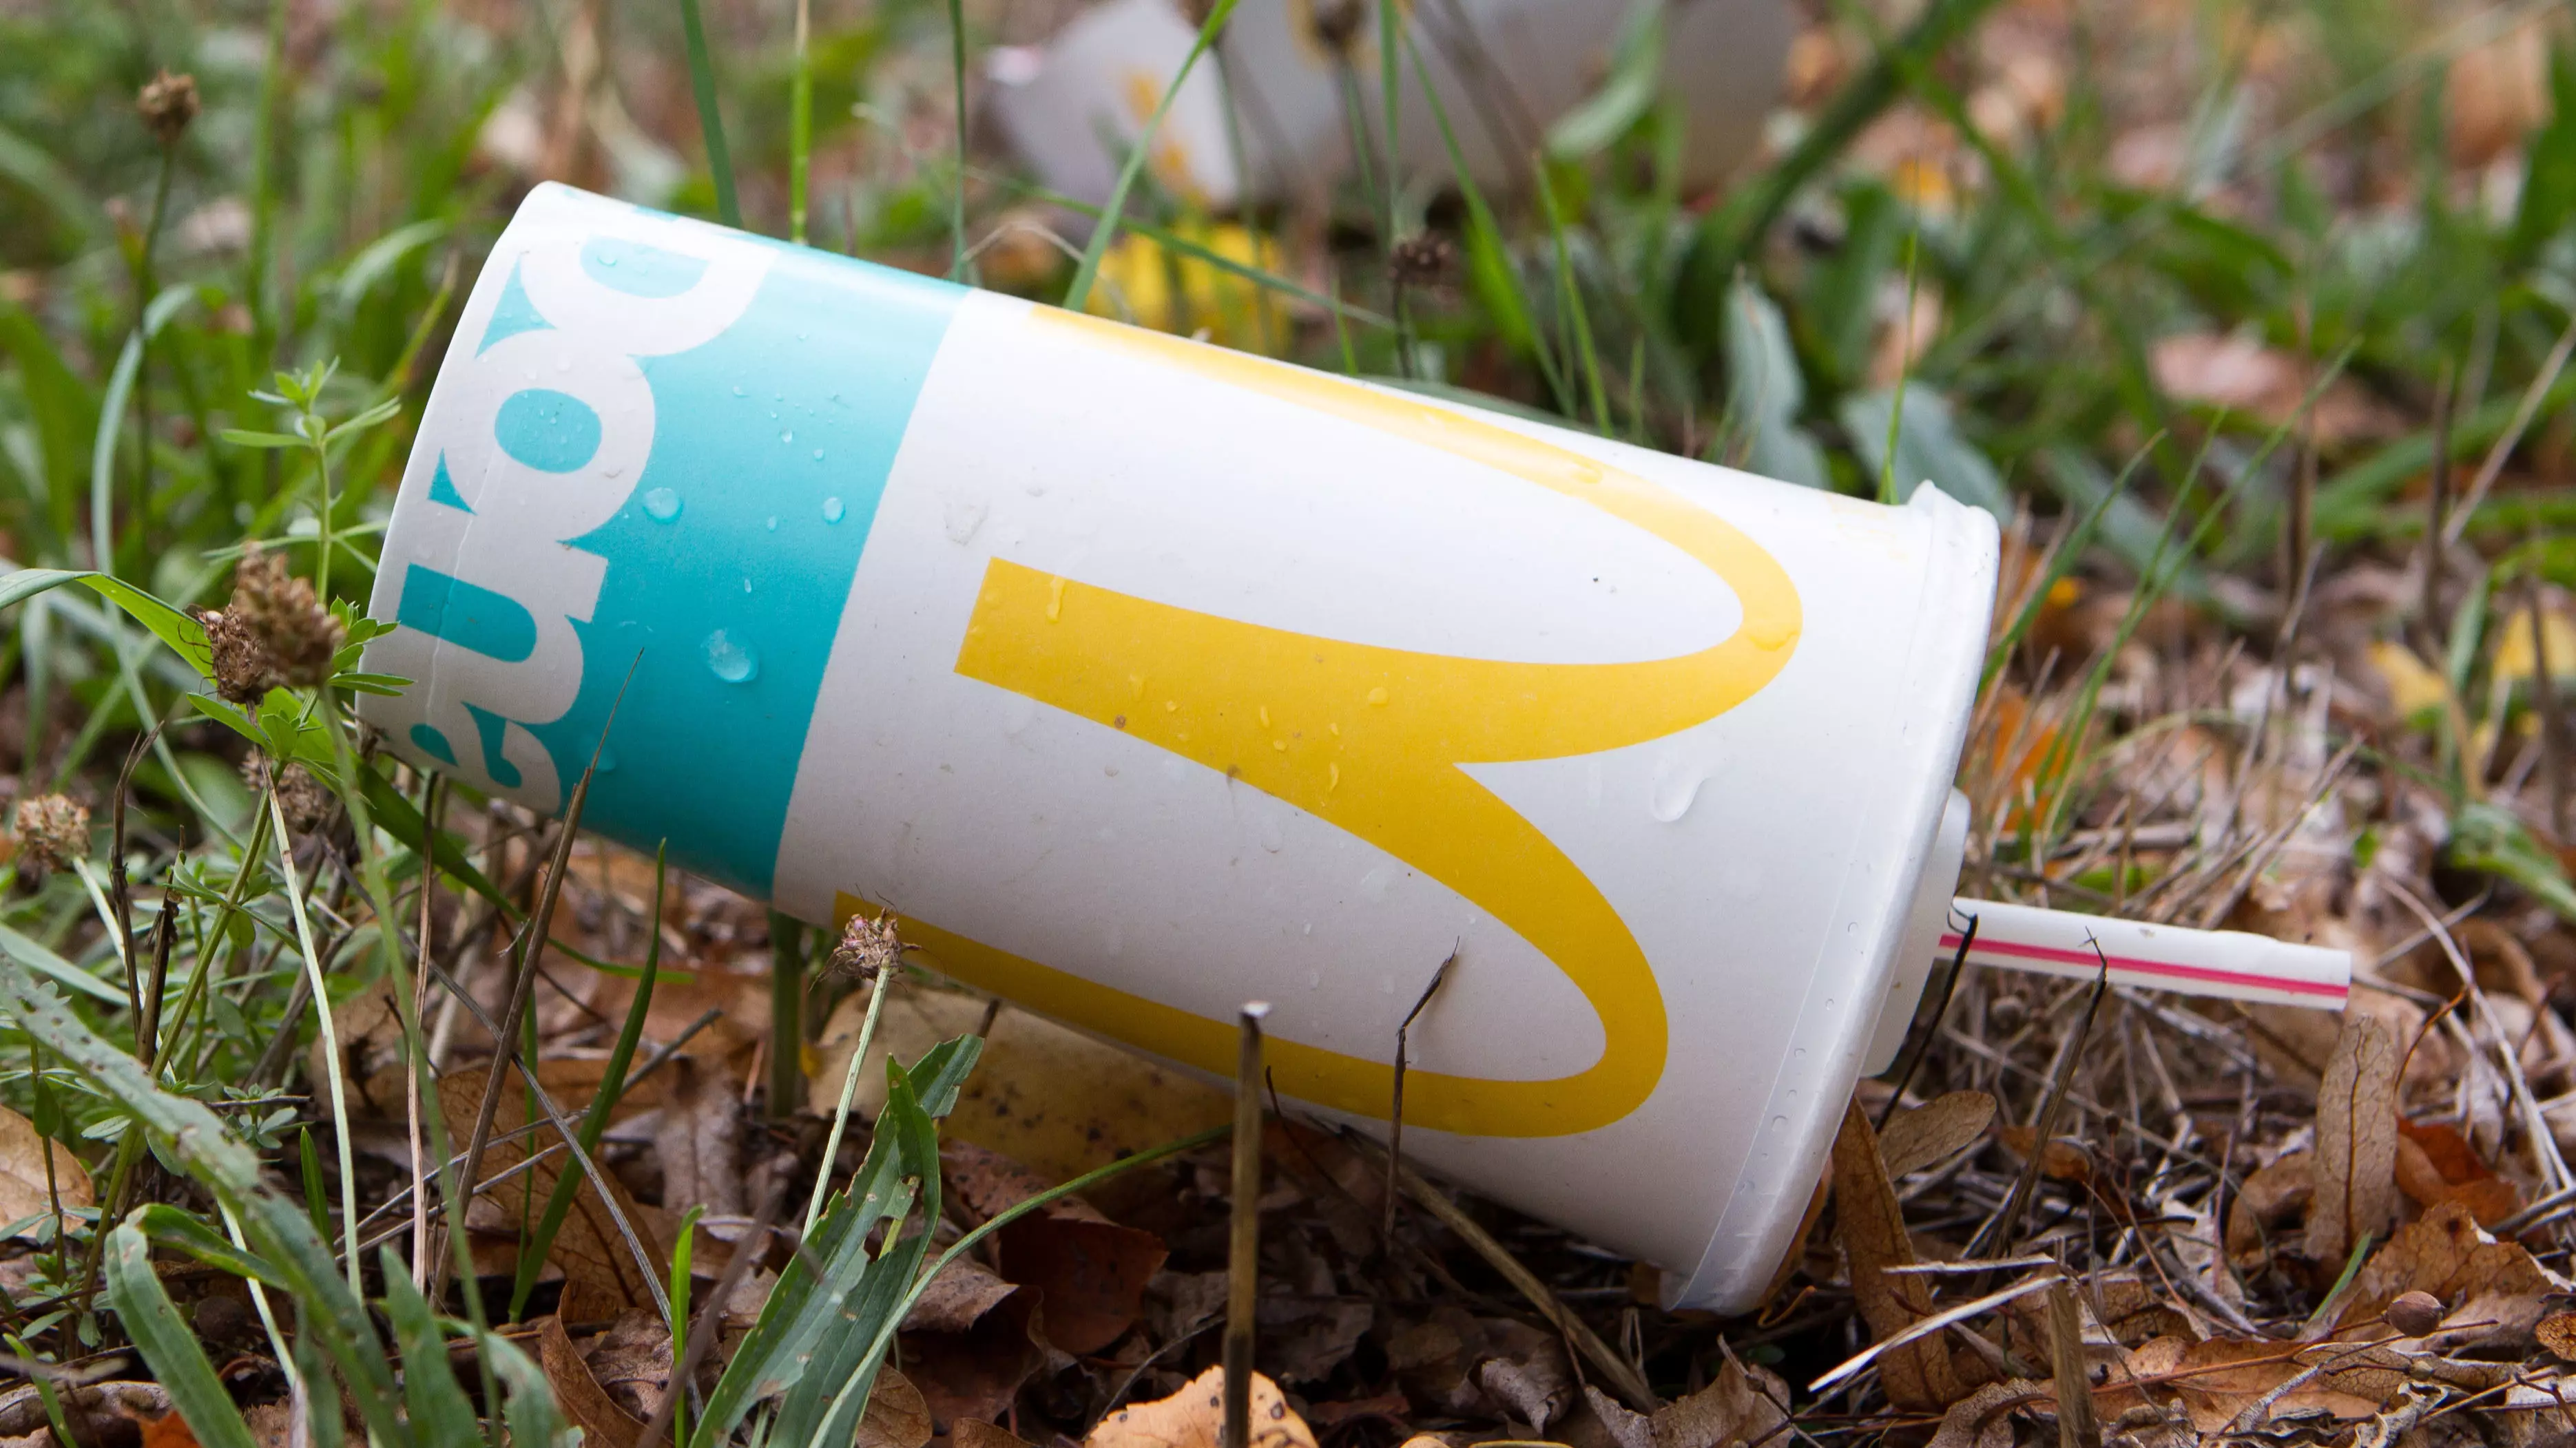 Nearly 35,000 Sign Petition For McDonald's To Bring Back Plastic Straws